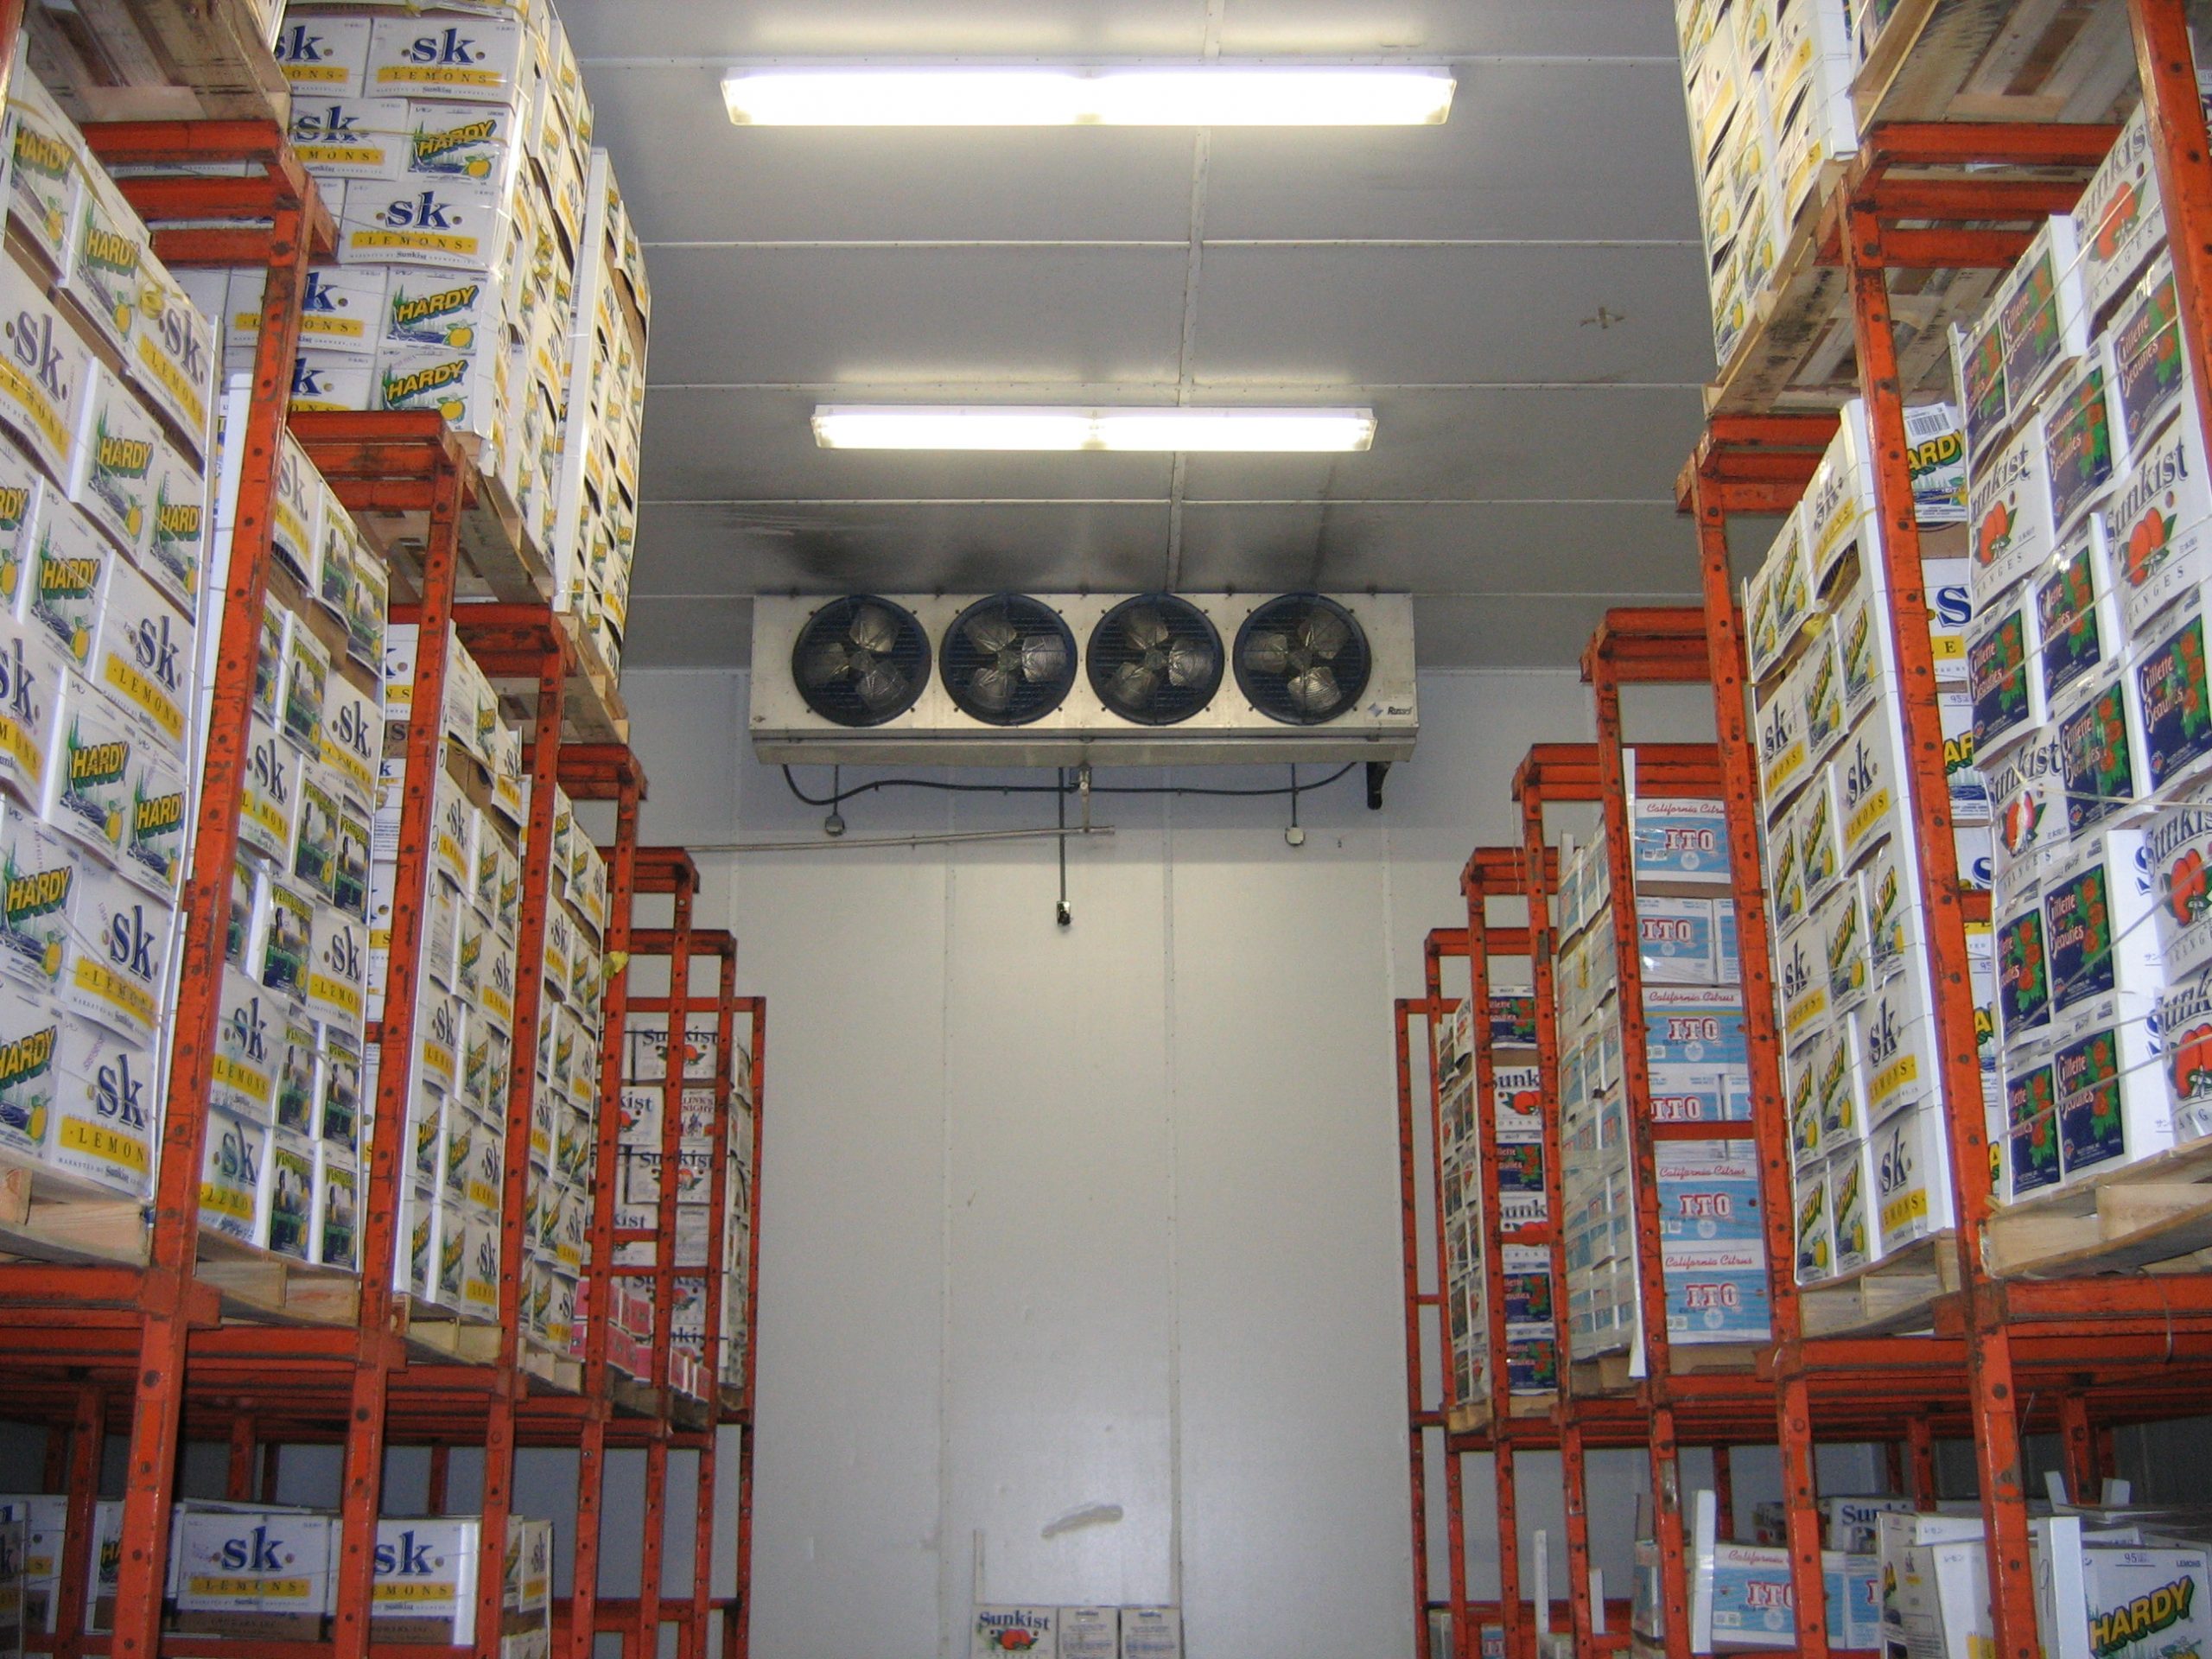 A picture of an evaporator fan in a produce warehouse